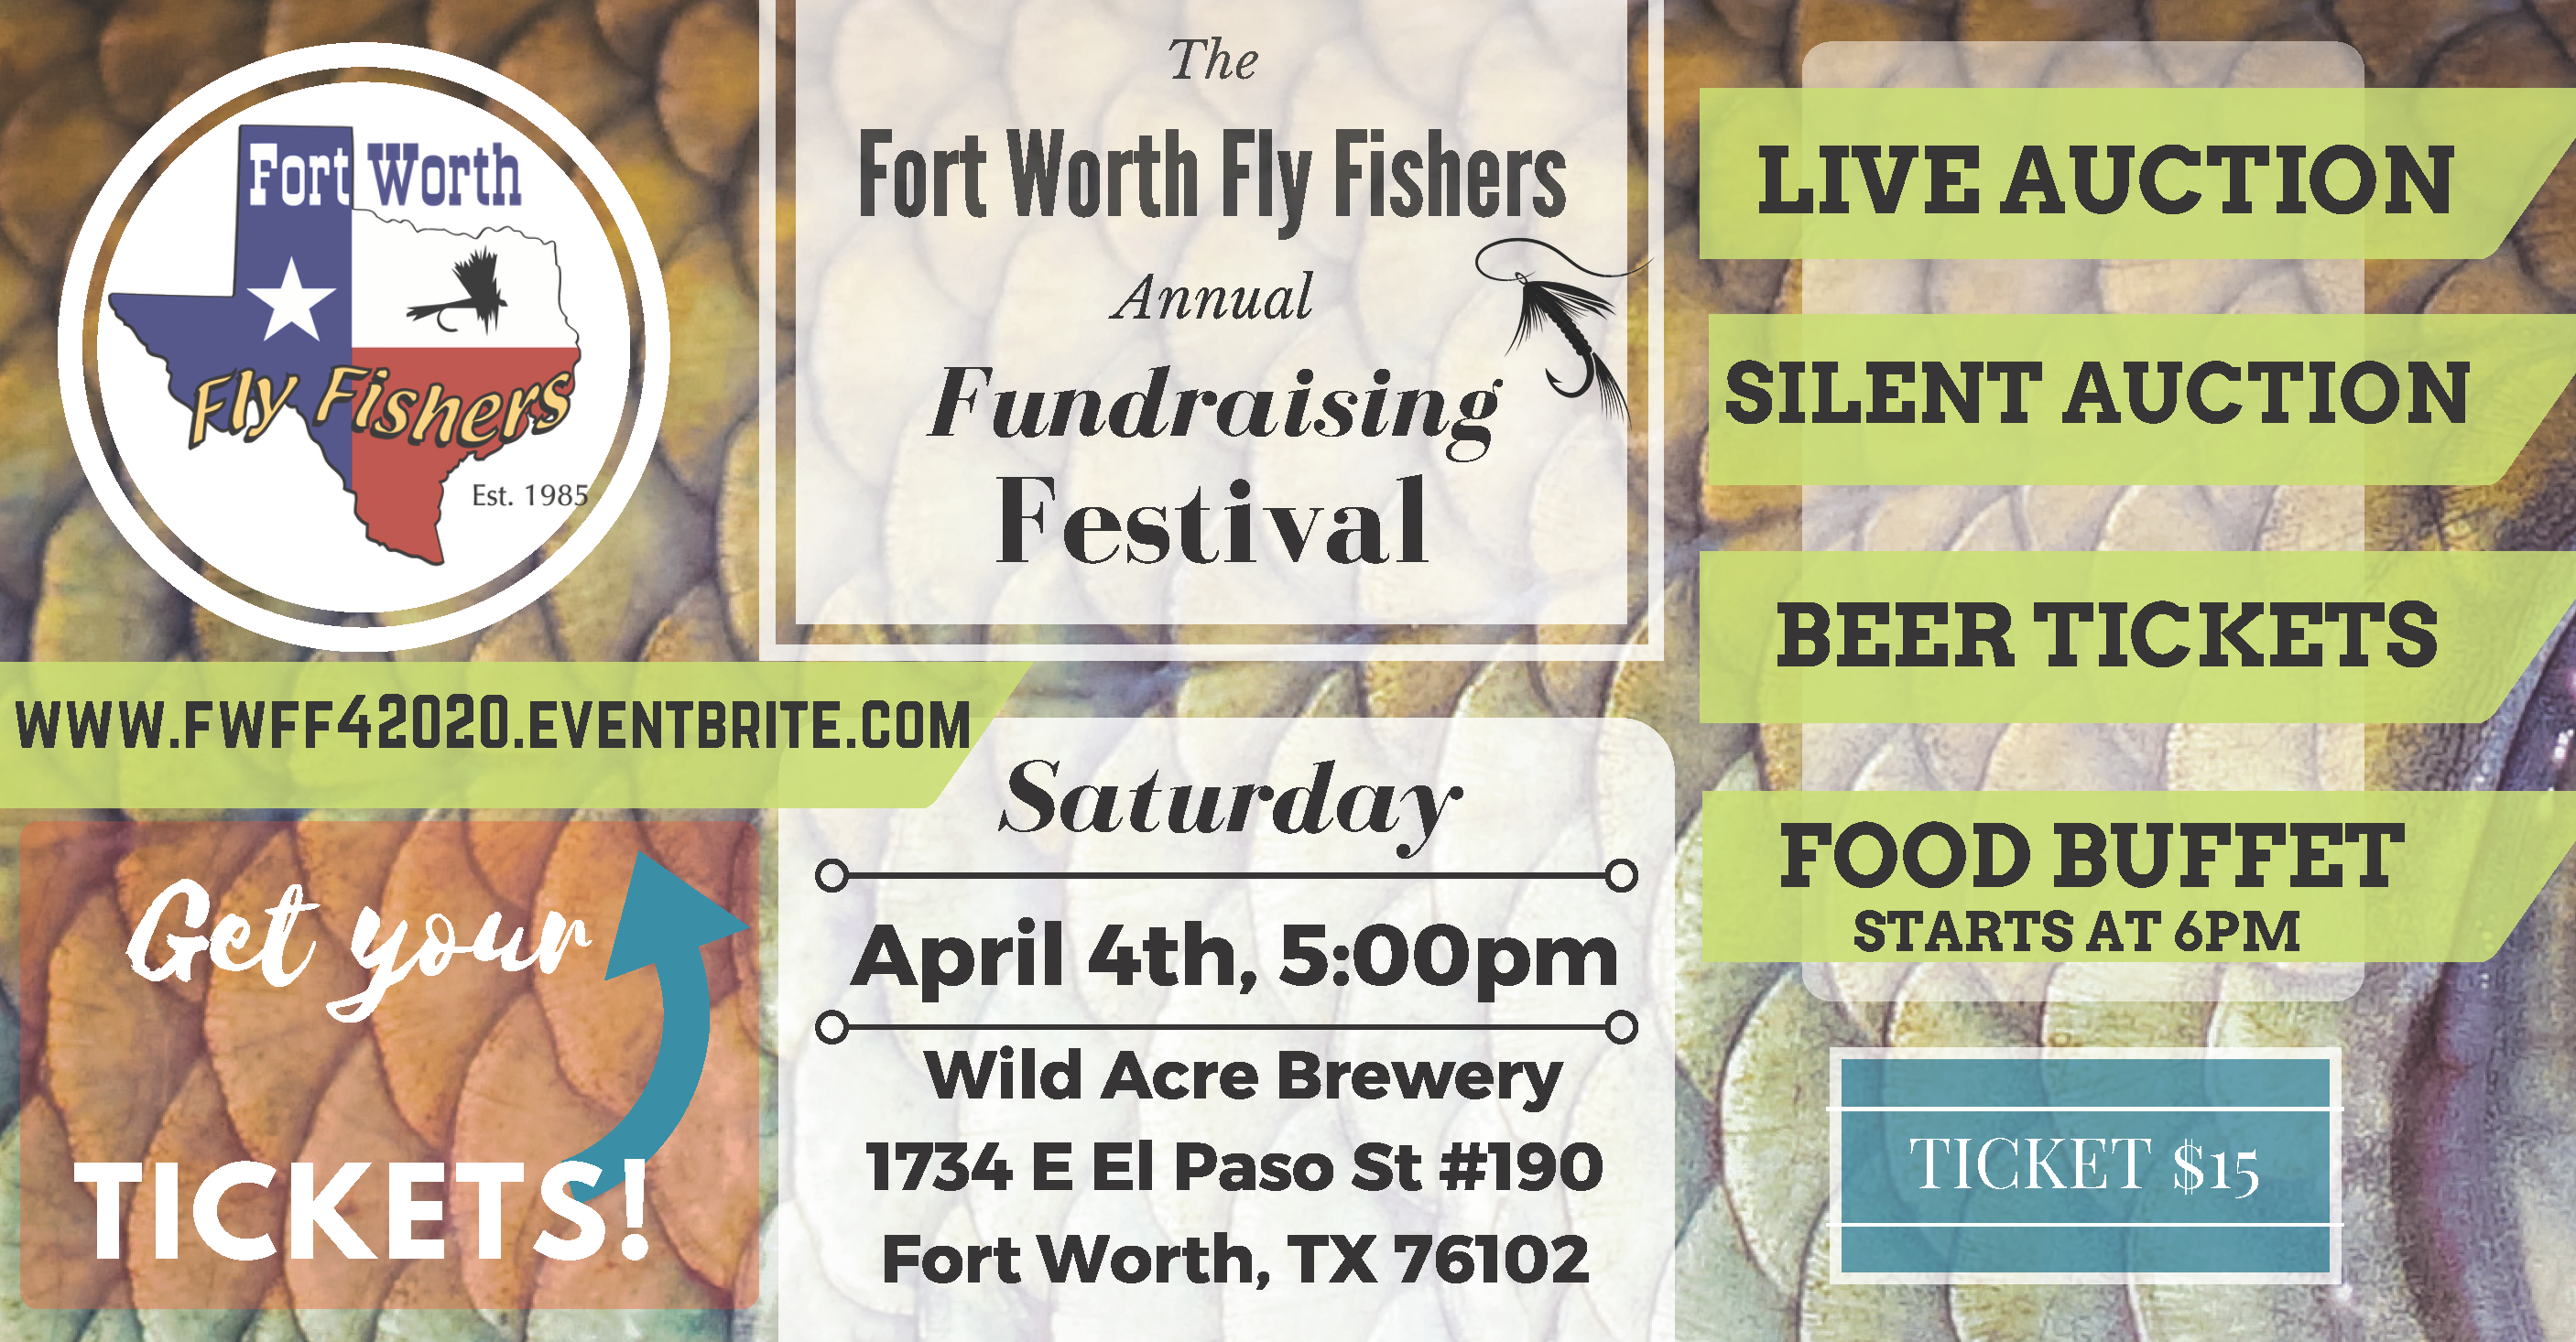 Fort Worth Fly Fishers Fundraising Festival 2020